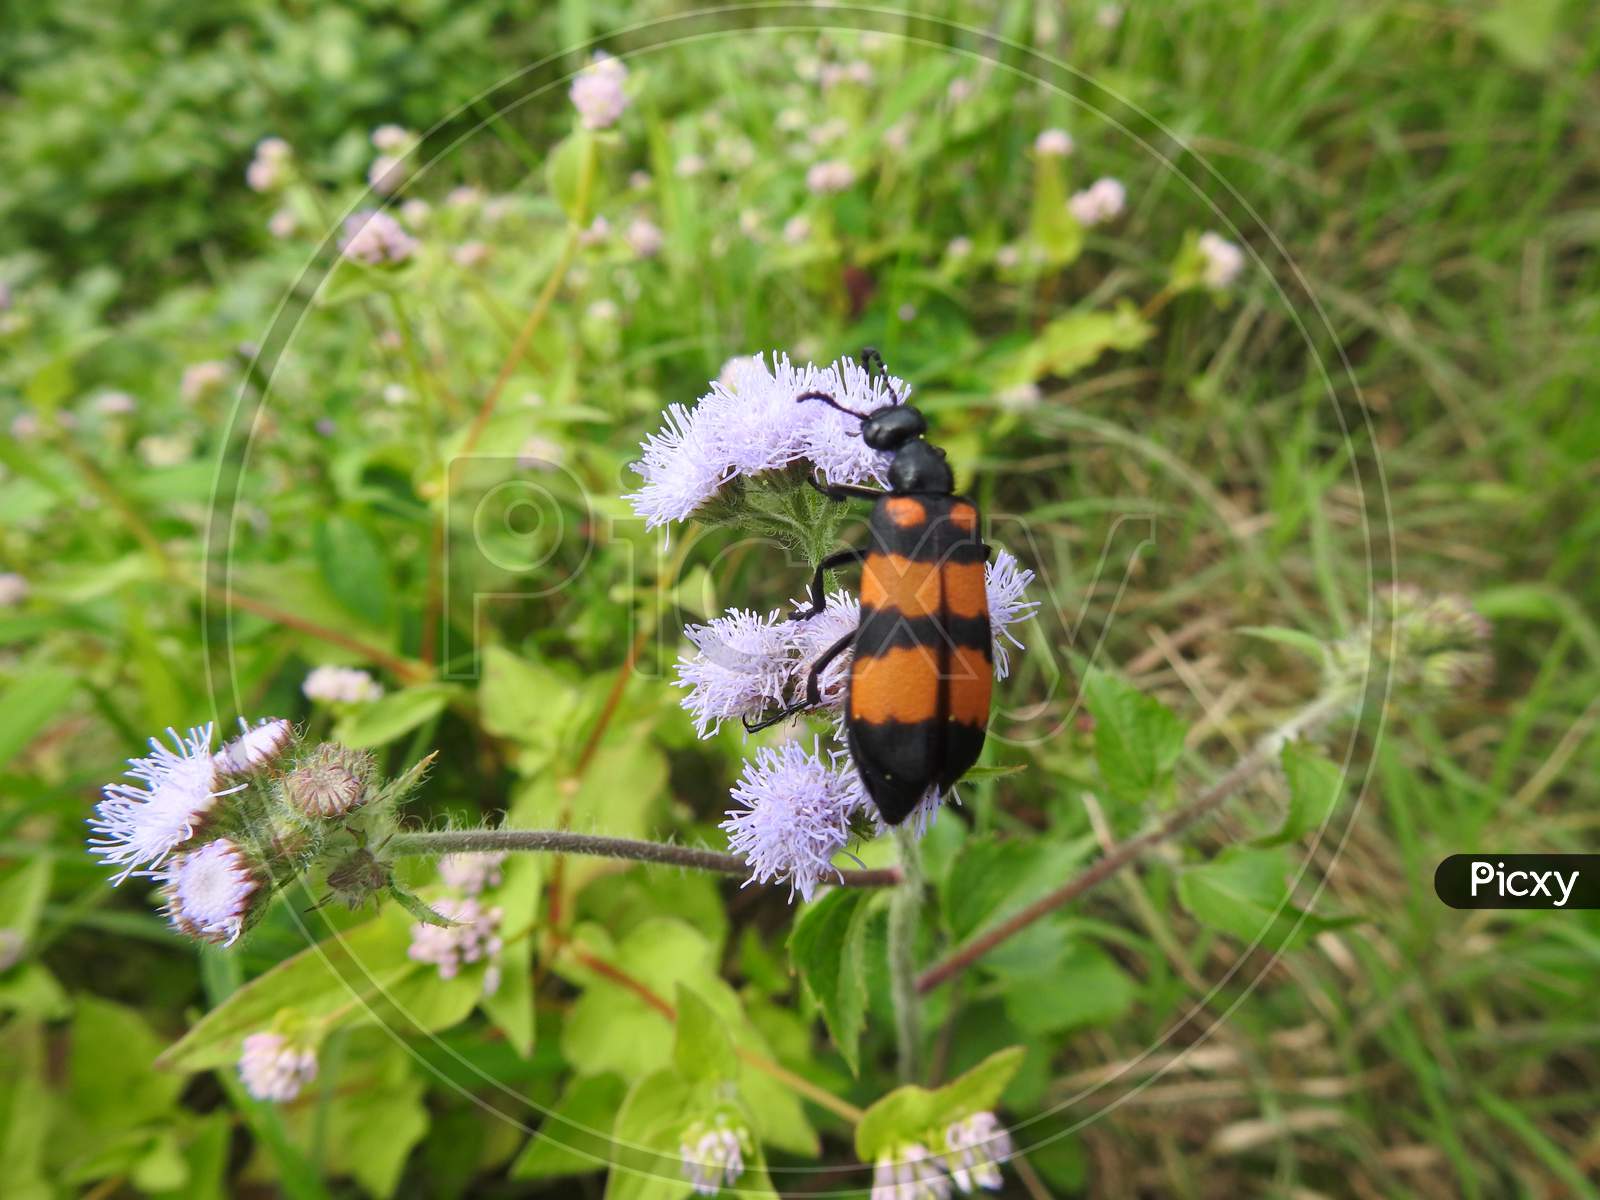 Blister beetle in Agricultural field